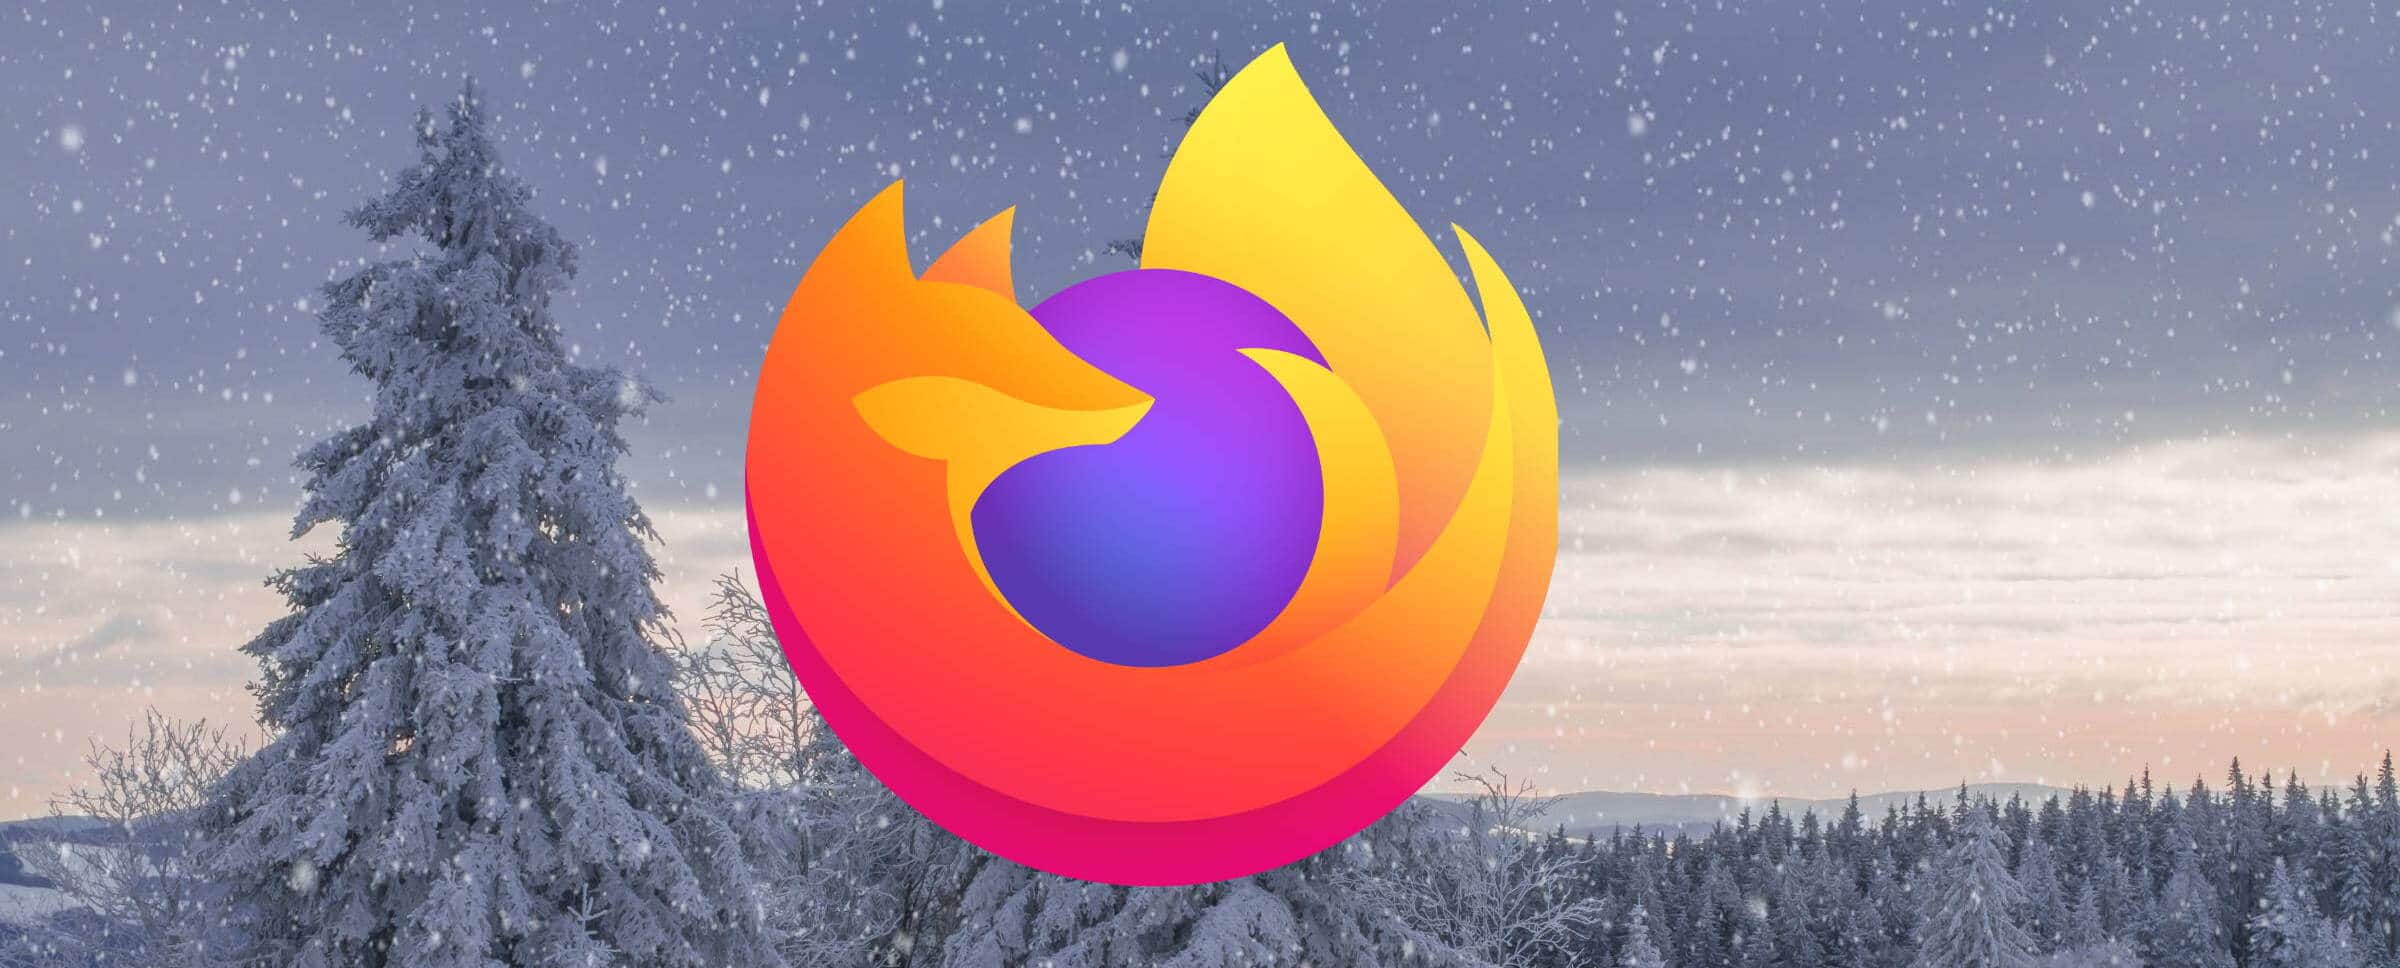 Firefox is one of the options with which you can browse the internet